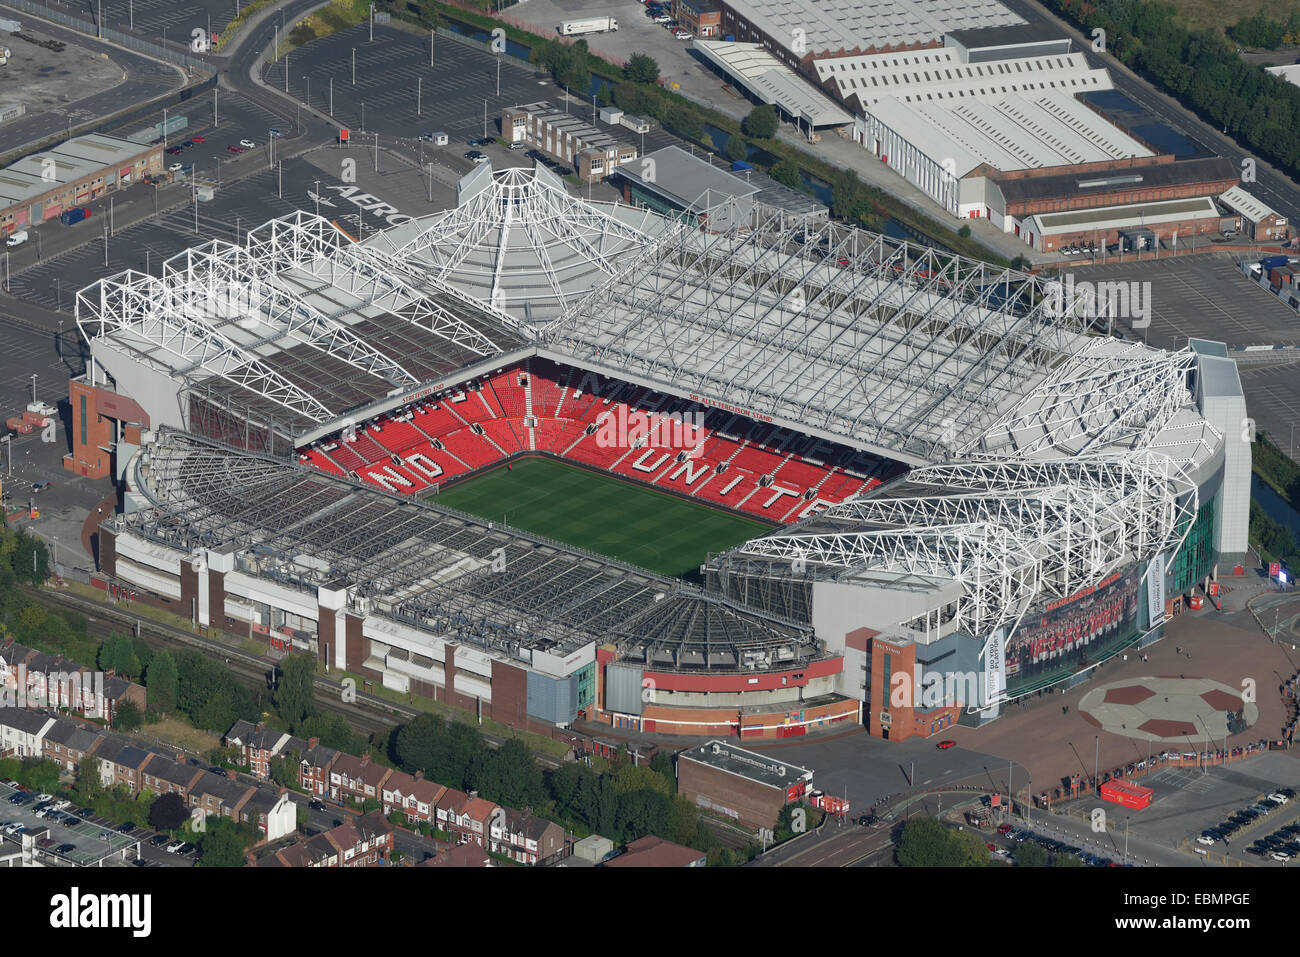 An aerial view of Old Trafford football stadium, home of Manchester United FC Stock Photo